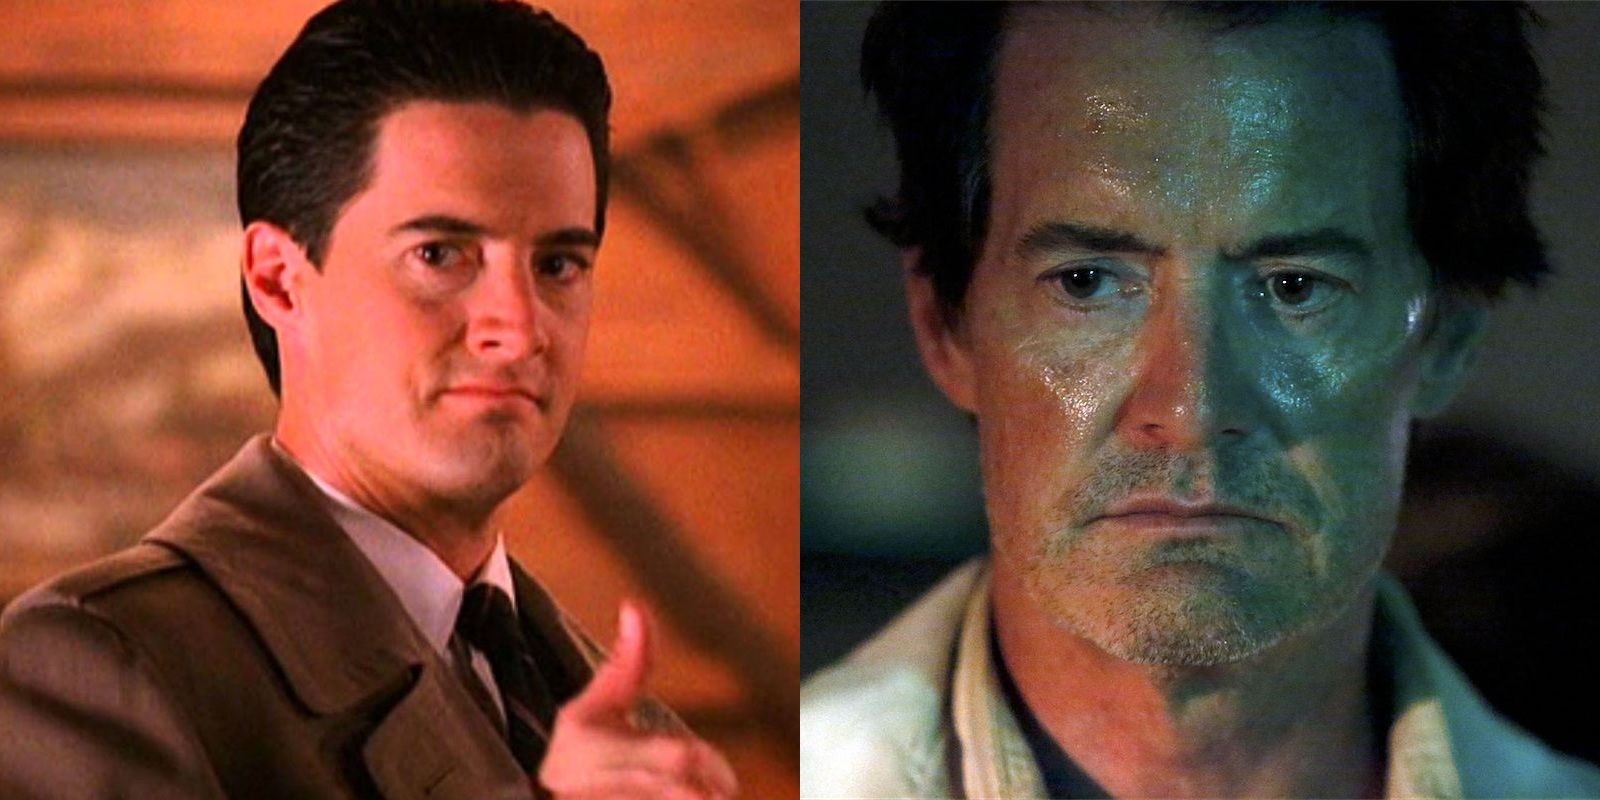 Kyle MacLachlan as Agent Dale Cooper in Twin Peaks and on Agents of S.H.I.E.L.D.